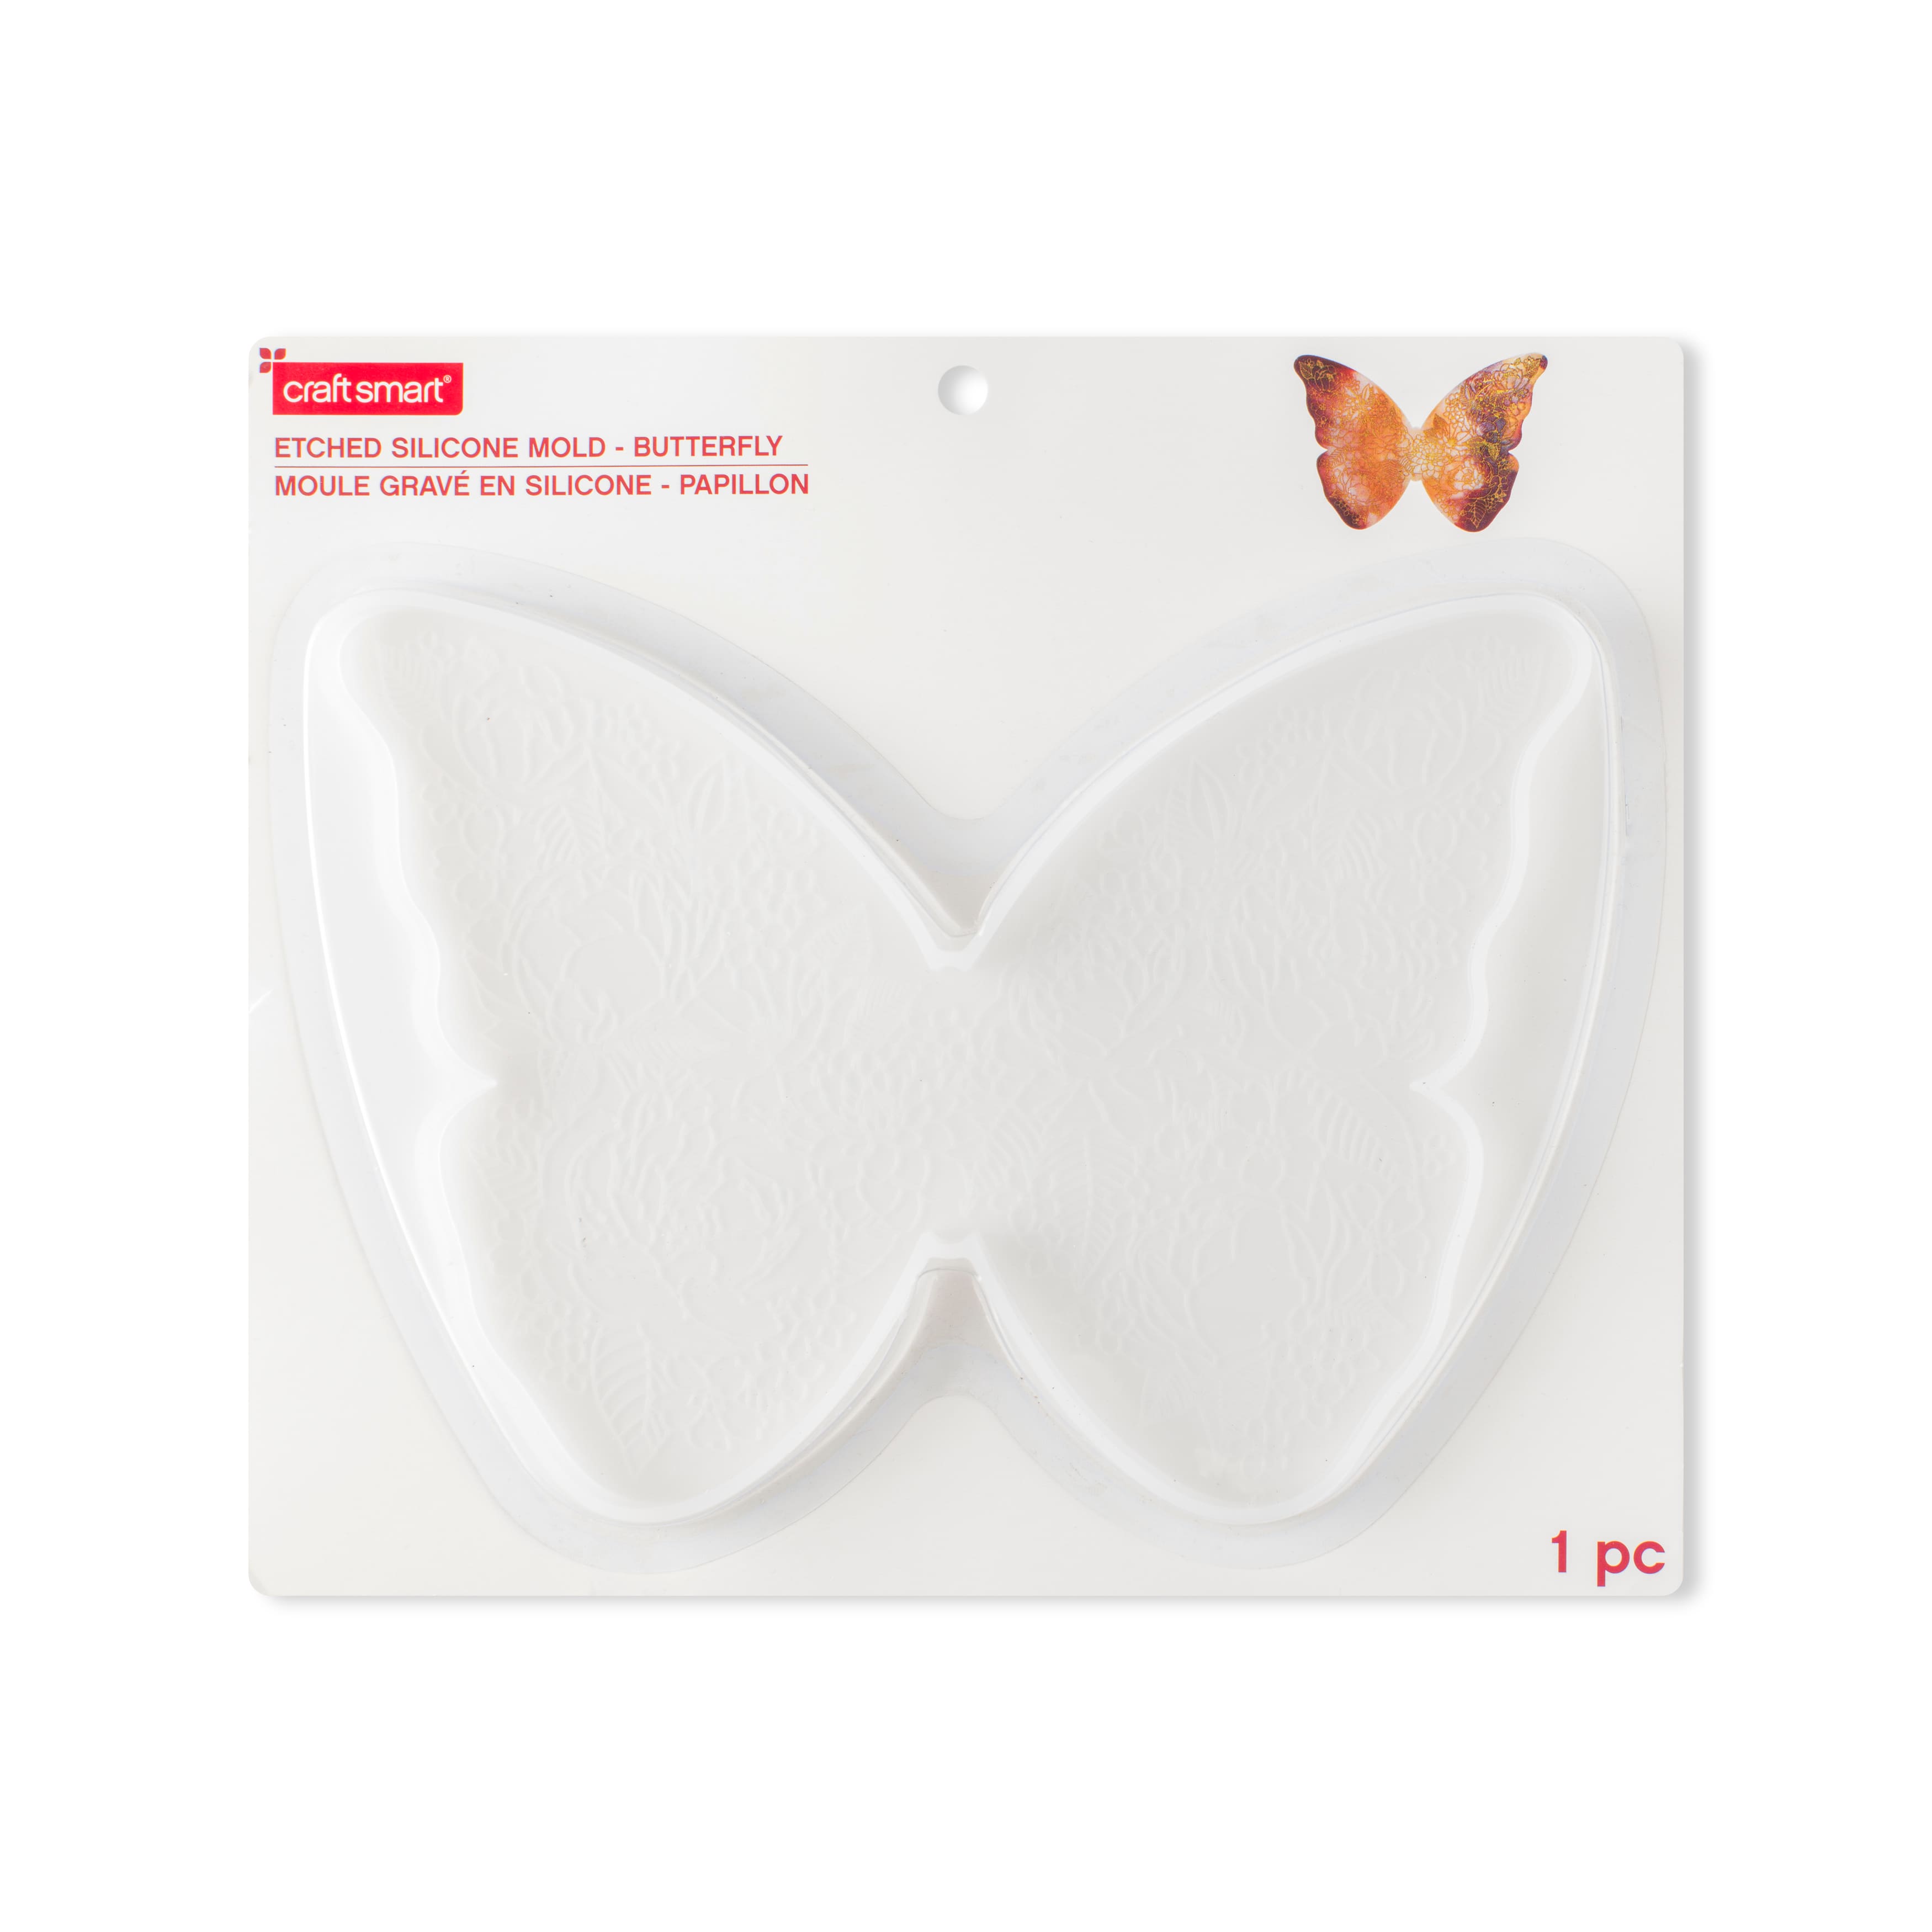 Craft by Smart® Silicone Butterfly Etched | Michaels Mold